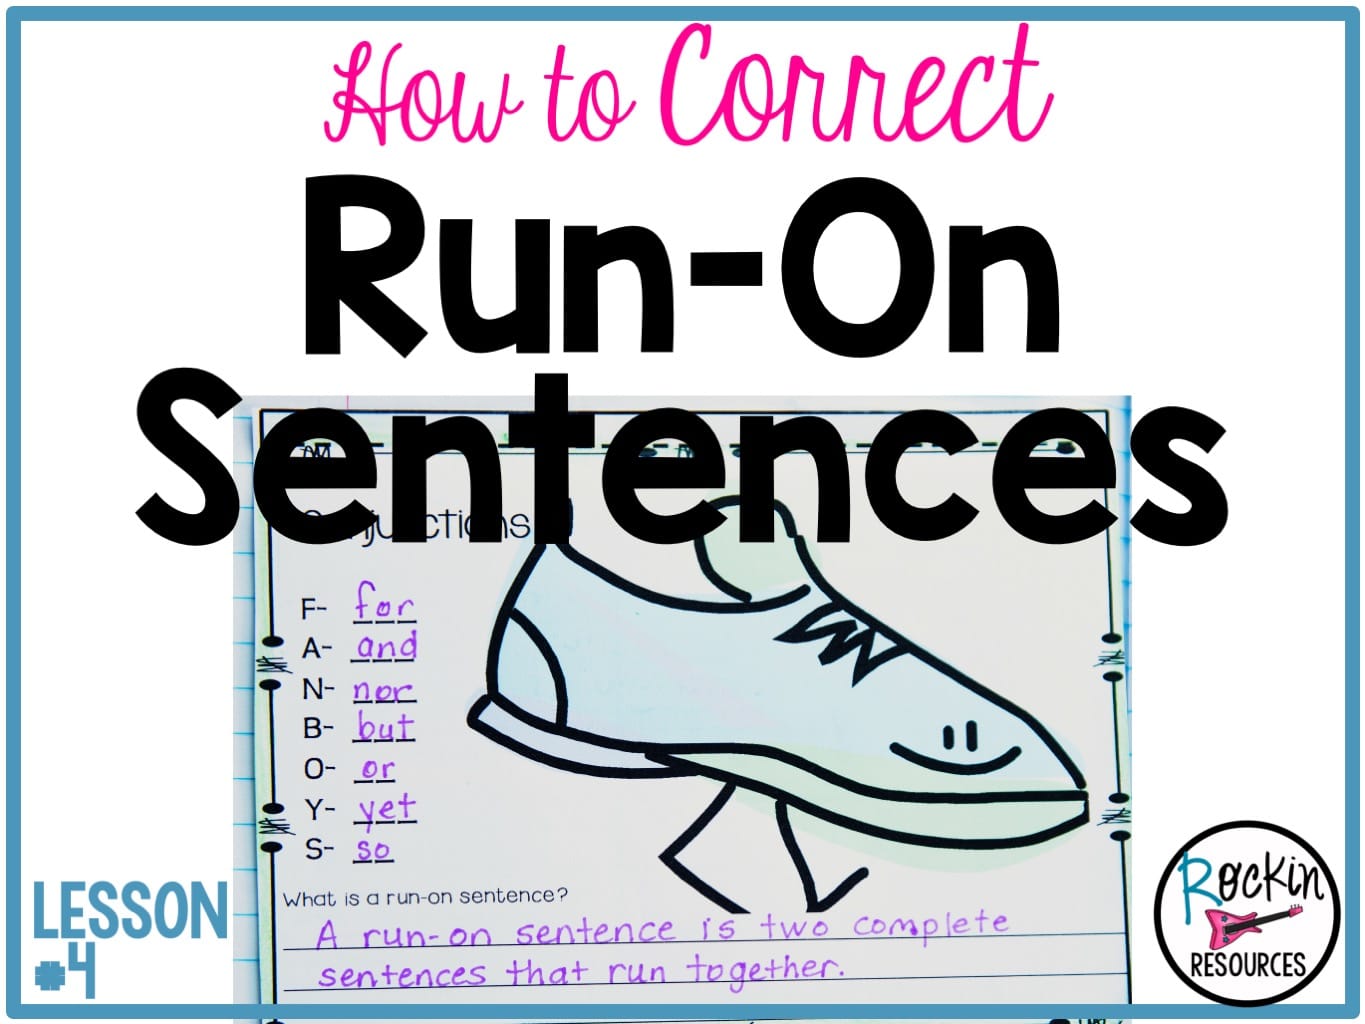 simple-and-compound-sentences-worksheet-with-answers